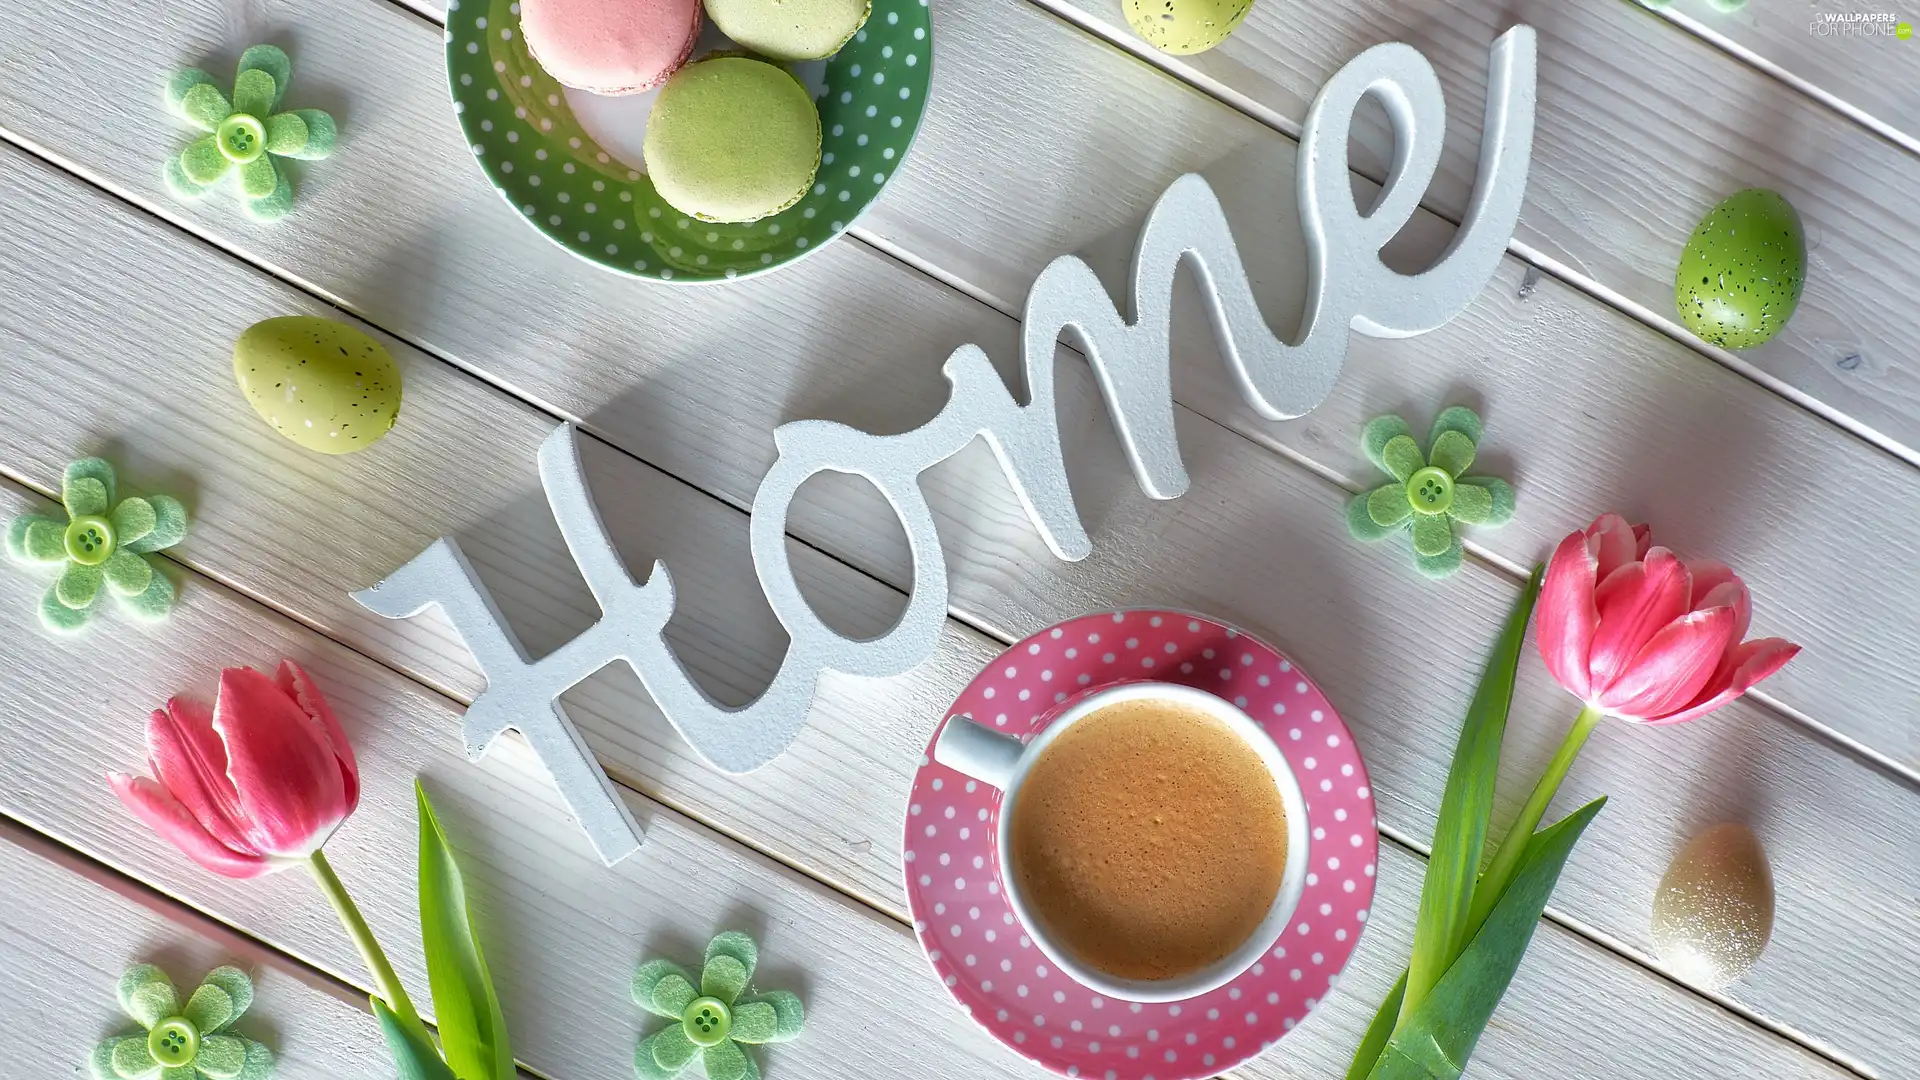 coffee, Cookies, text, Tulips, eggs, composition, boarding, cup, Macaroons, flowers, home